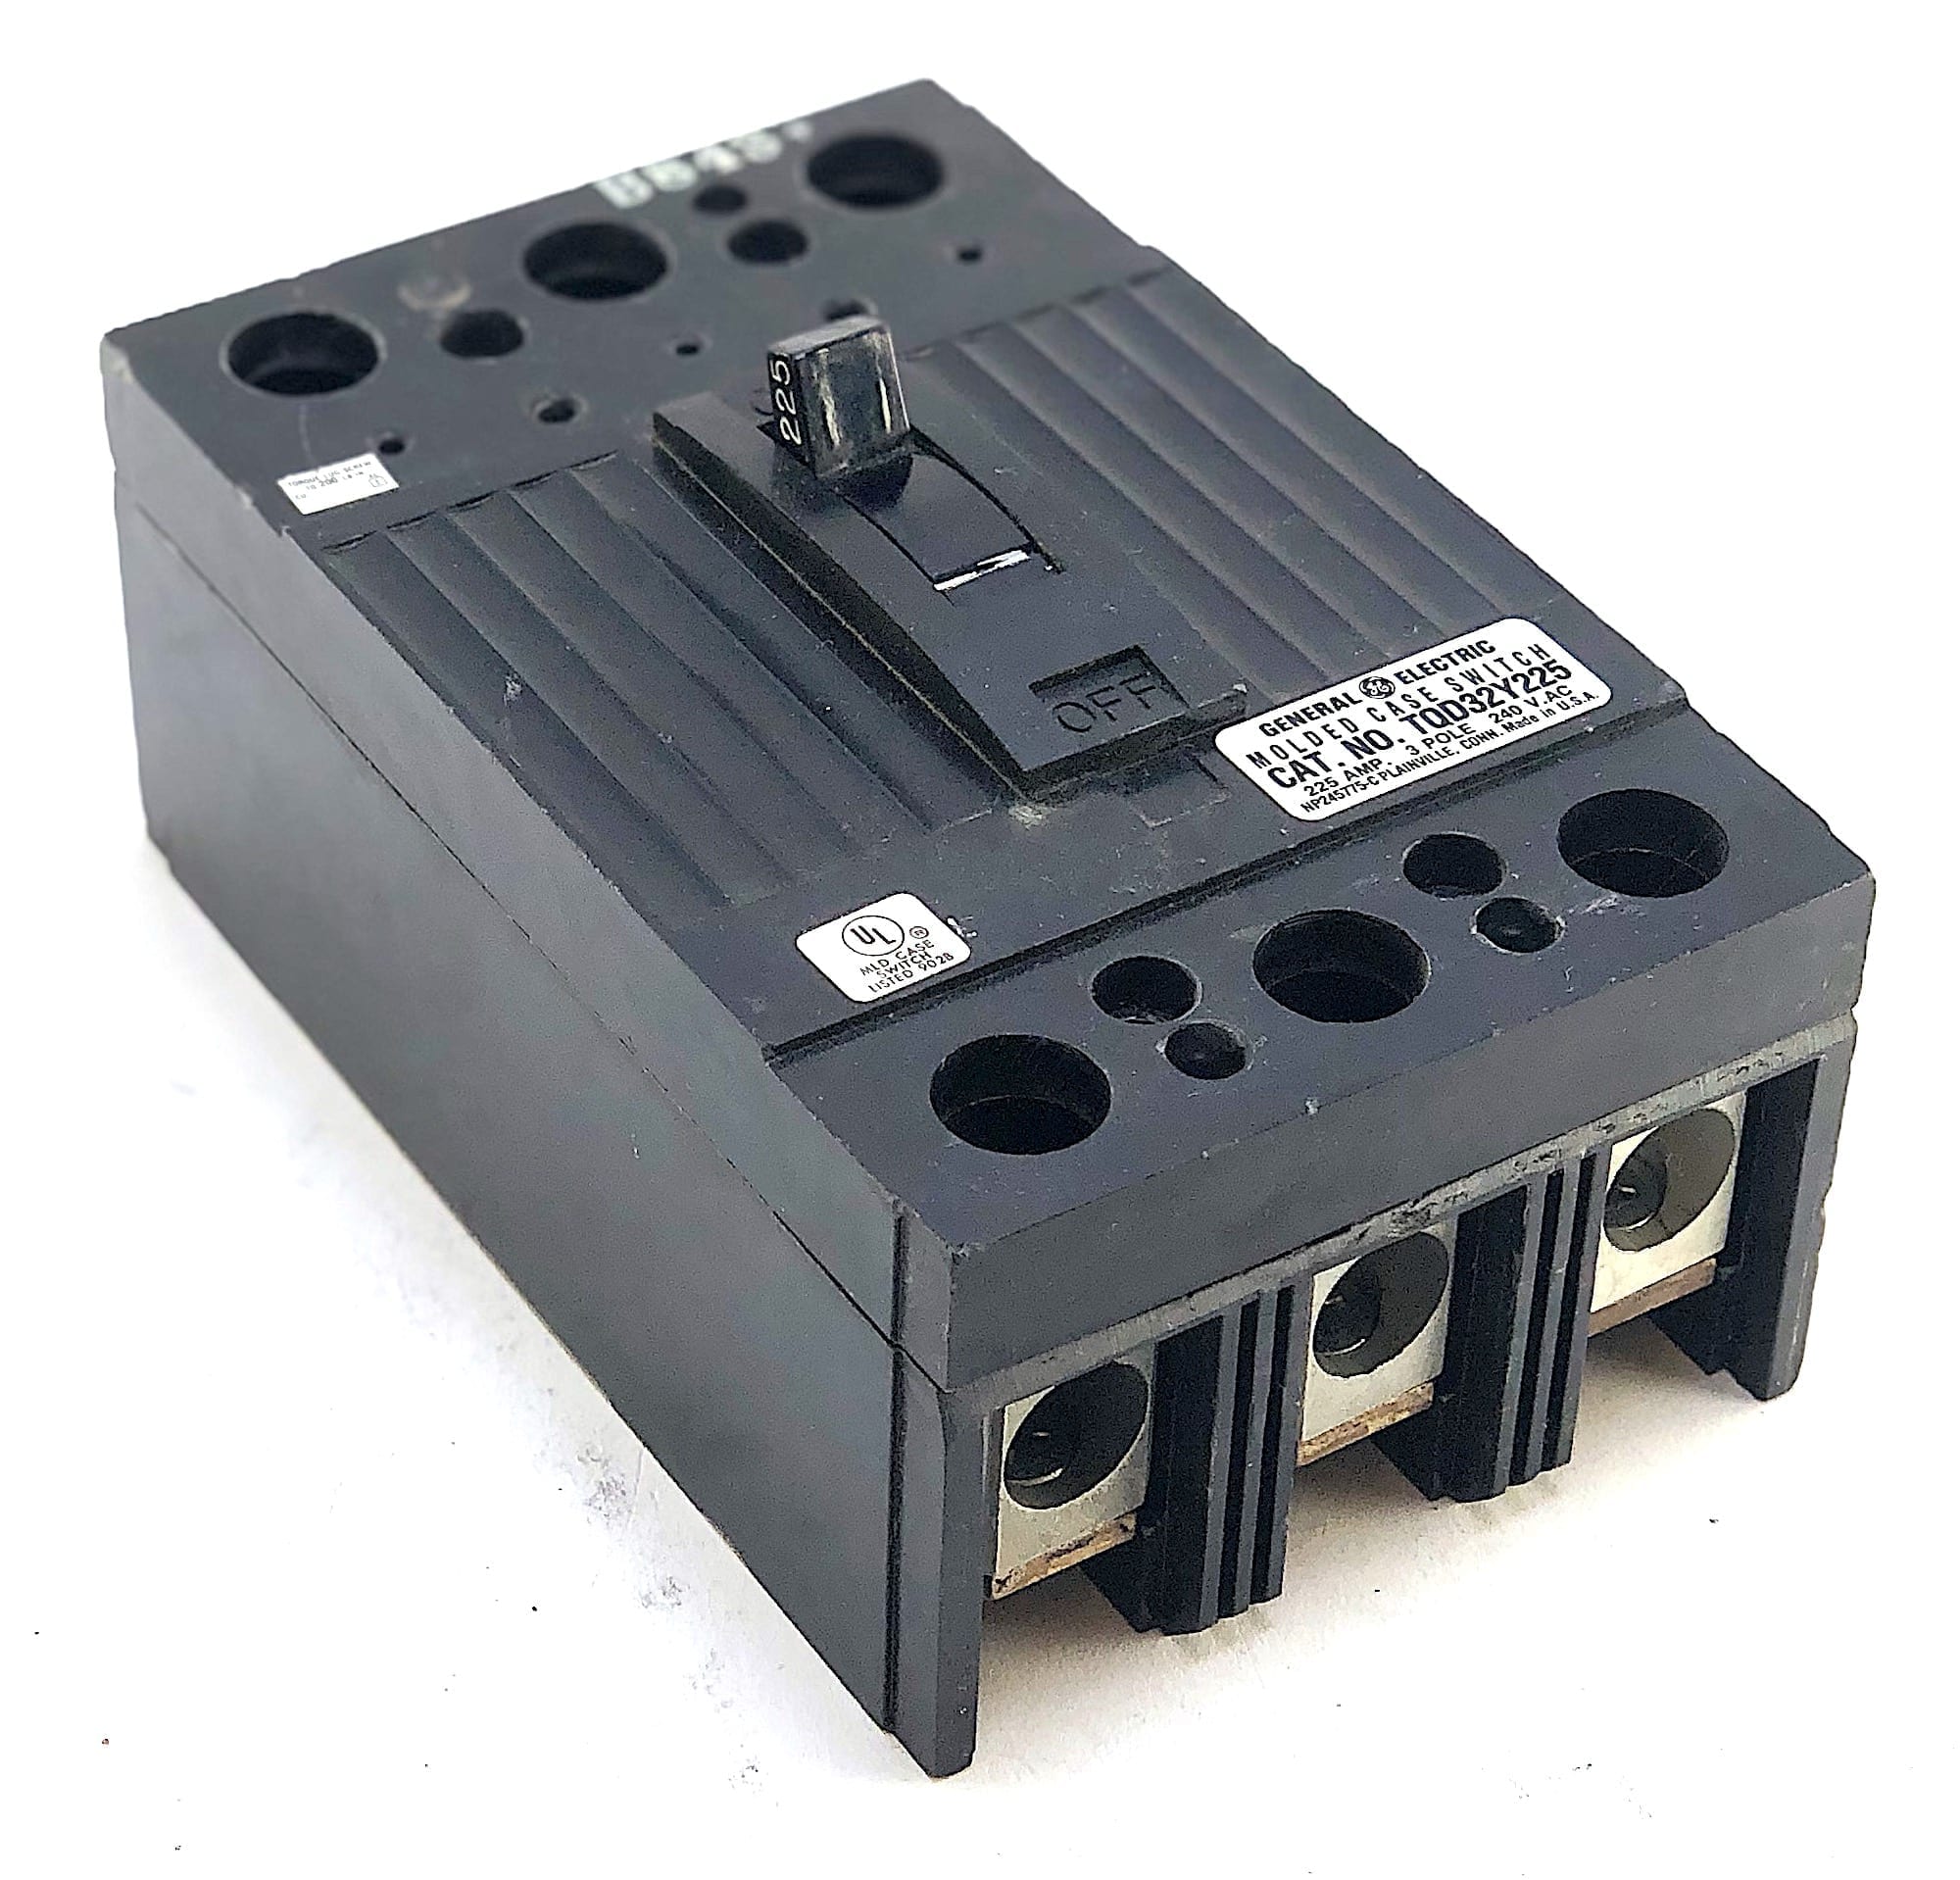 Details about   TQD32Y225 Molded Case 225V 240V Circuit Breaker 3Pole Q-Line TQD Circuit Breaker 